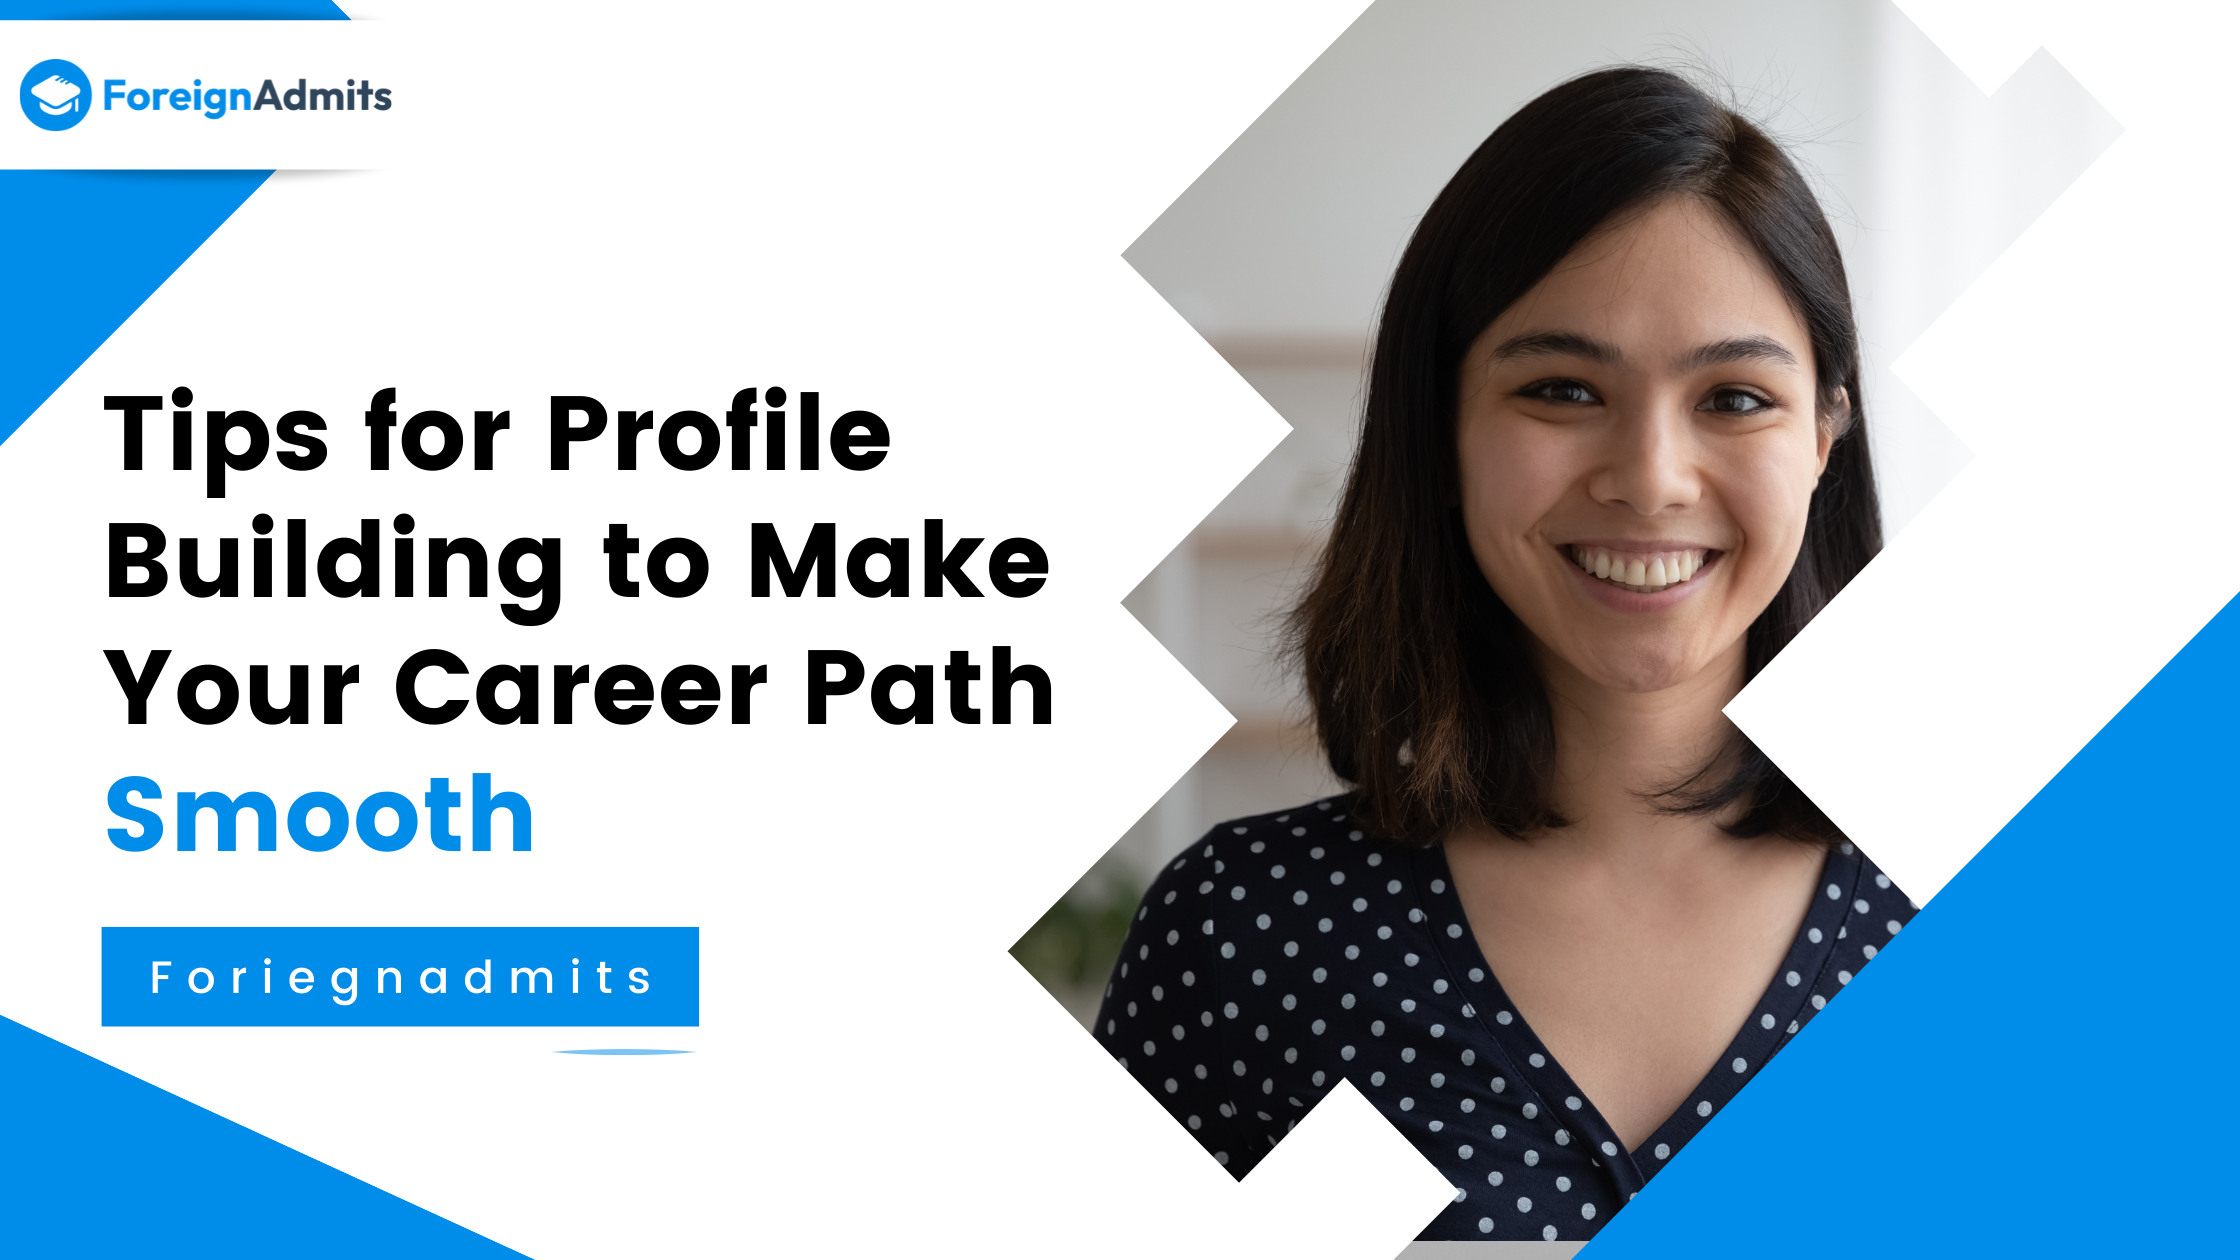 Tips for Profile Building to Make Your Career Path Smooth